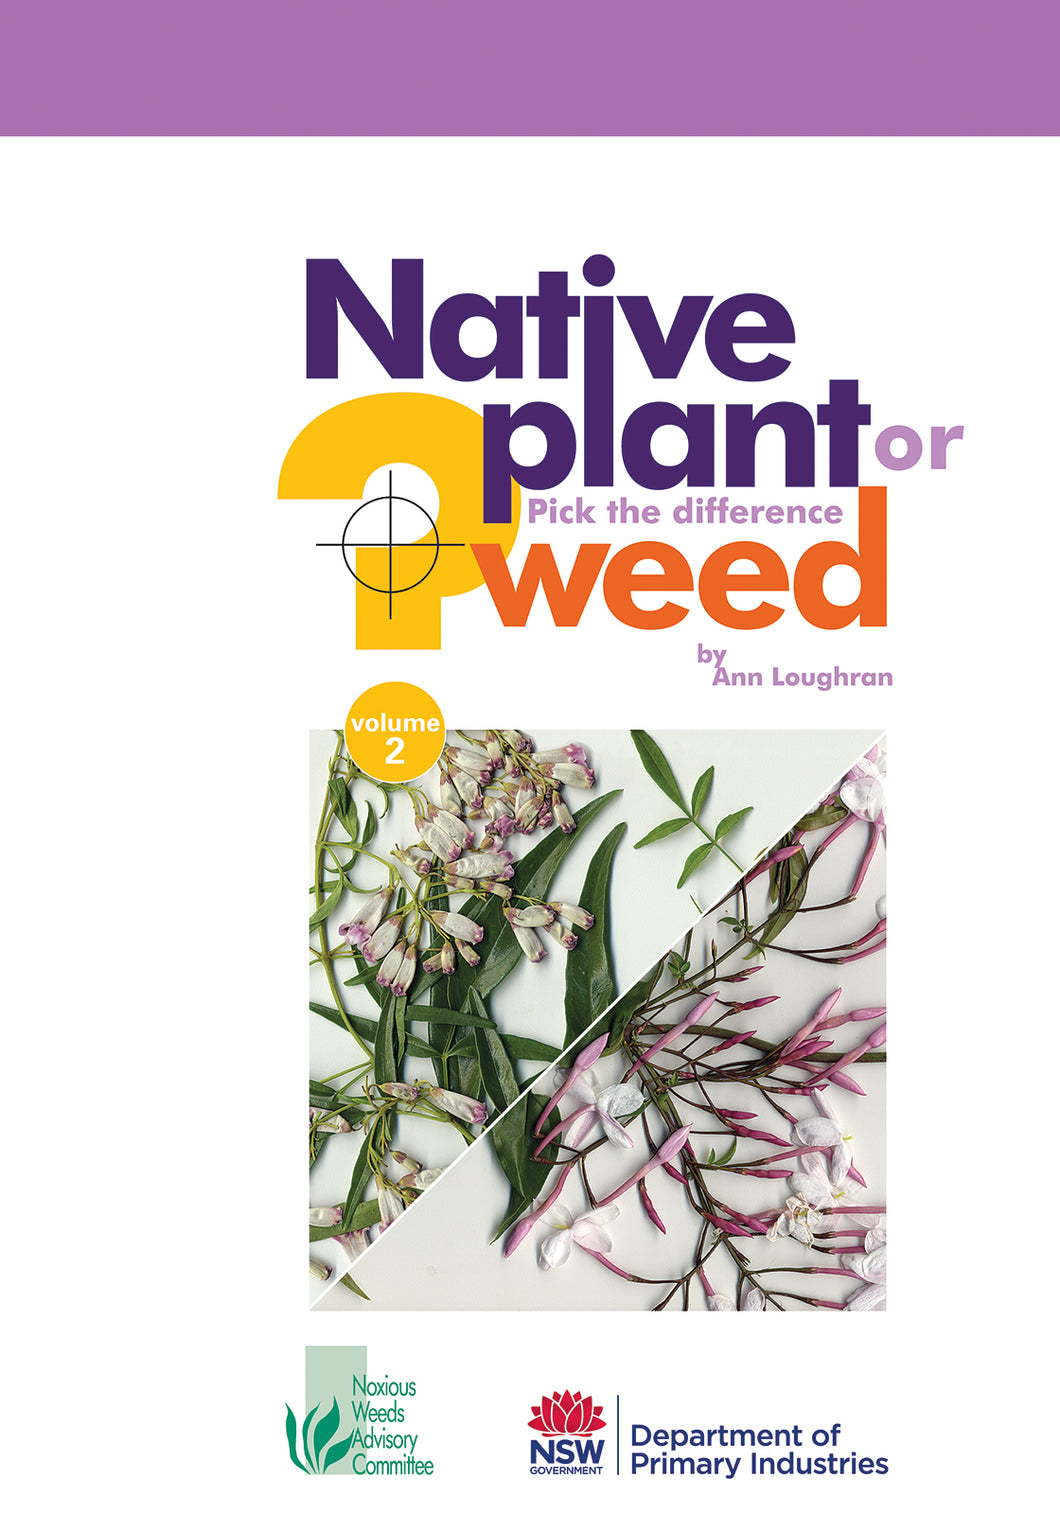 Native and weed 2 bookcover